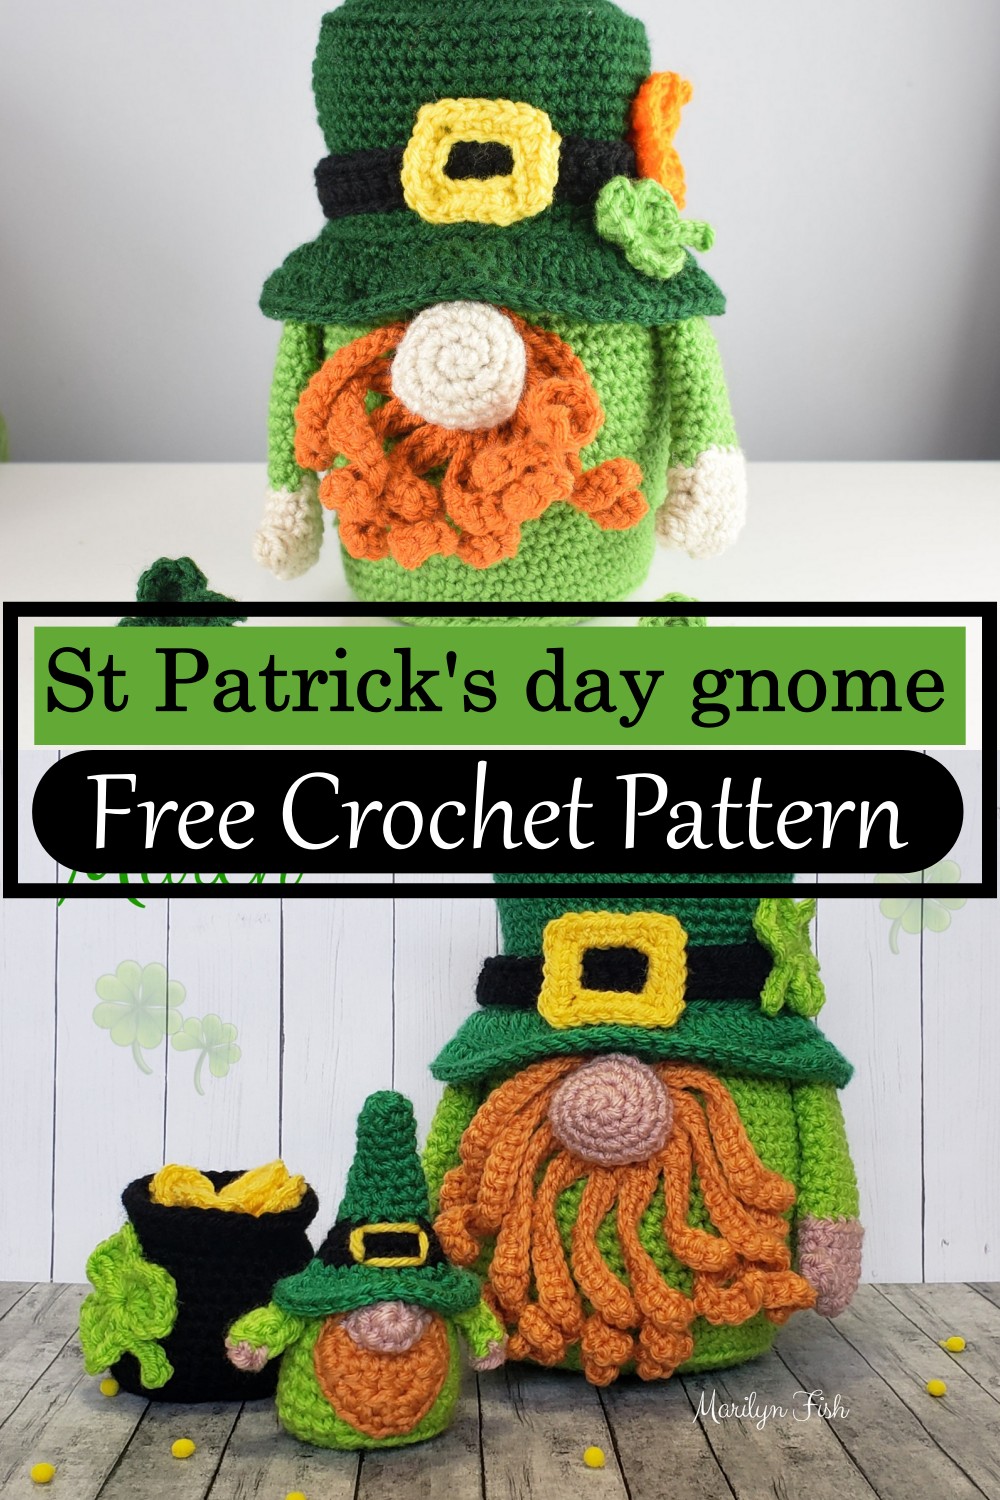 St Patrick's day gnome